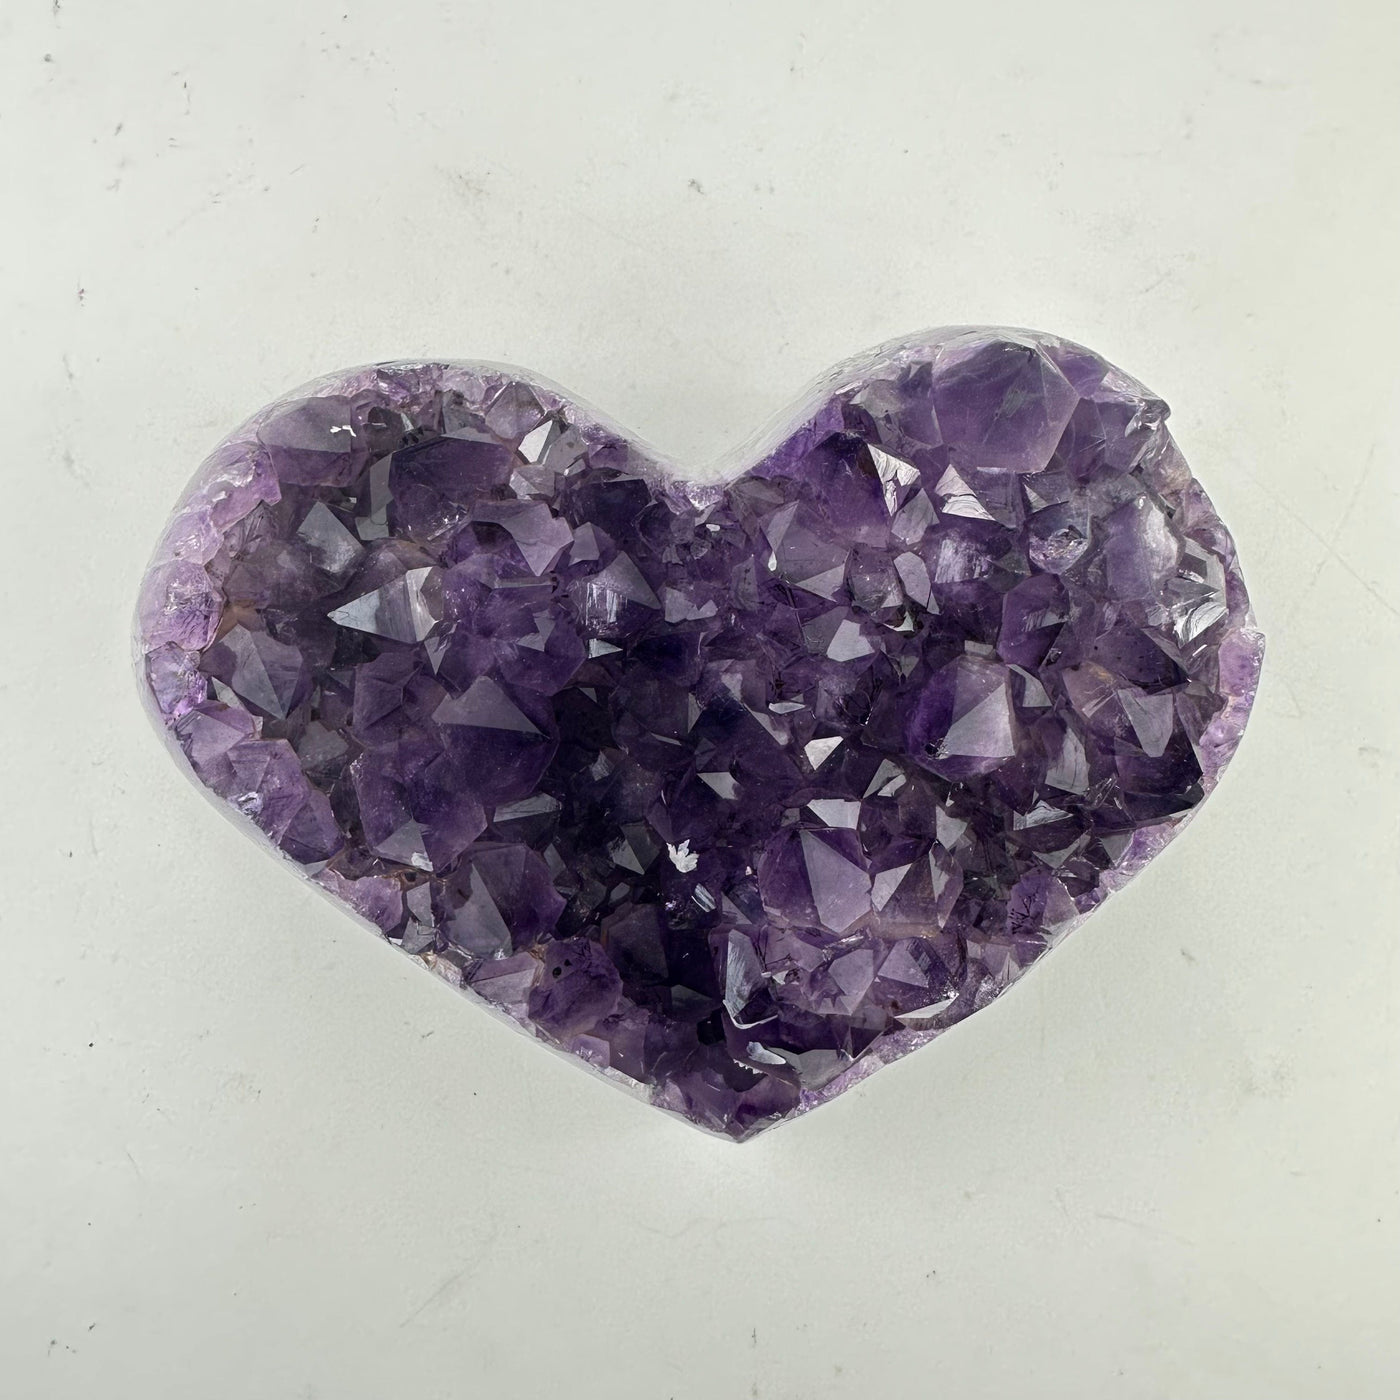 Amethyst Crystal Cluster Heart on white table